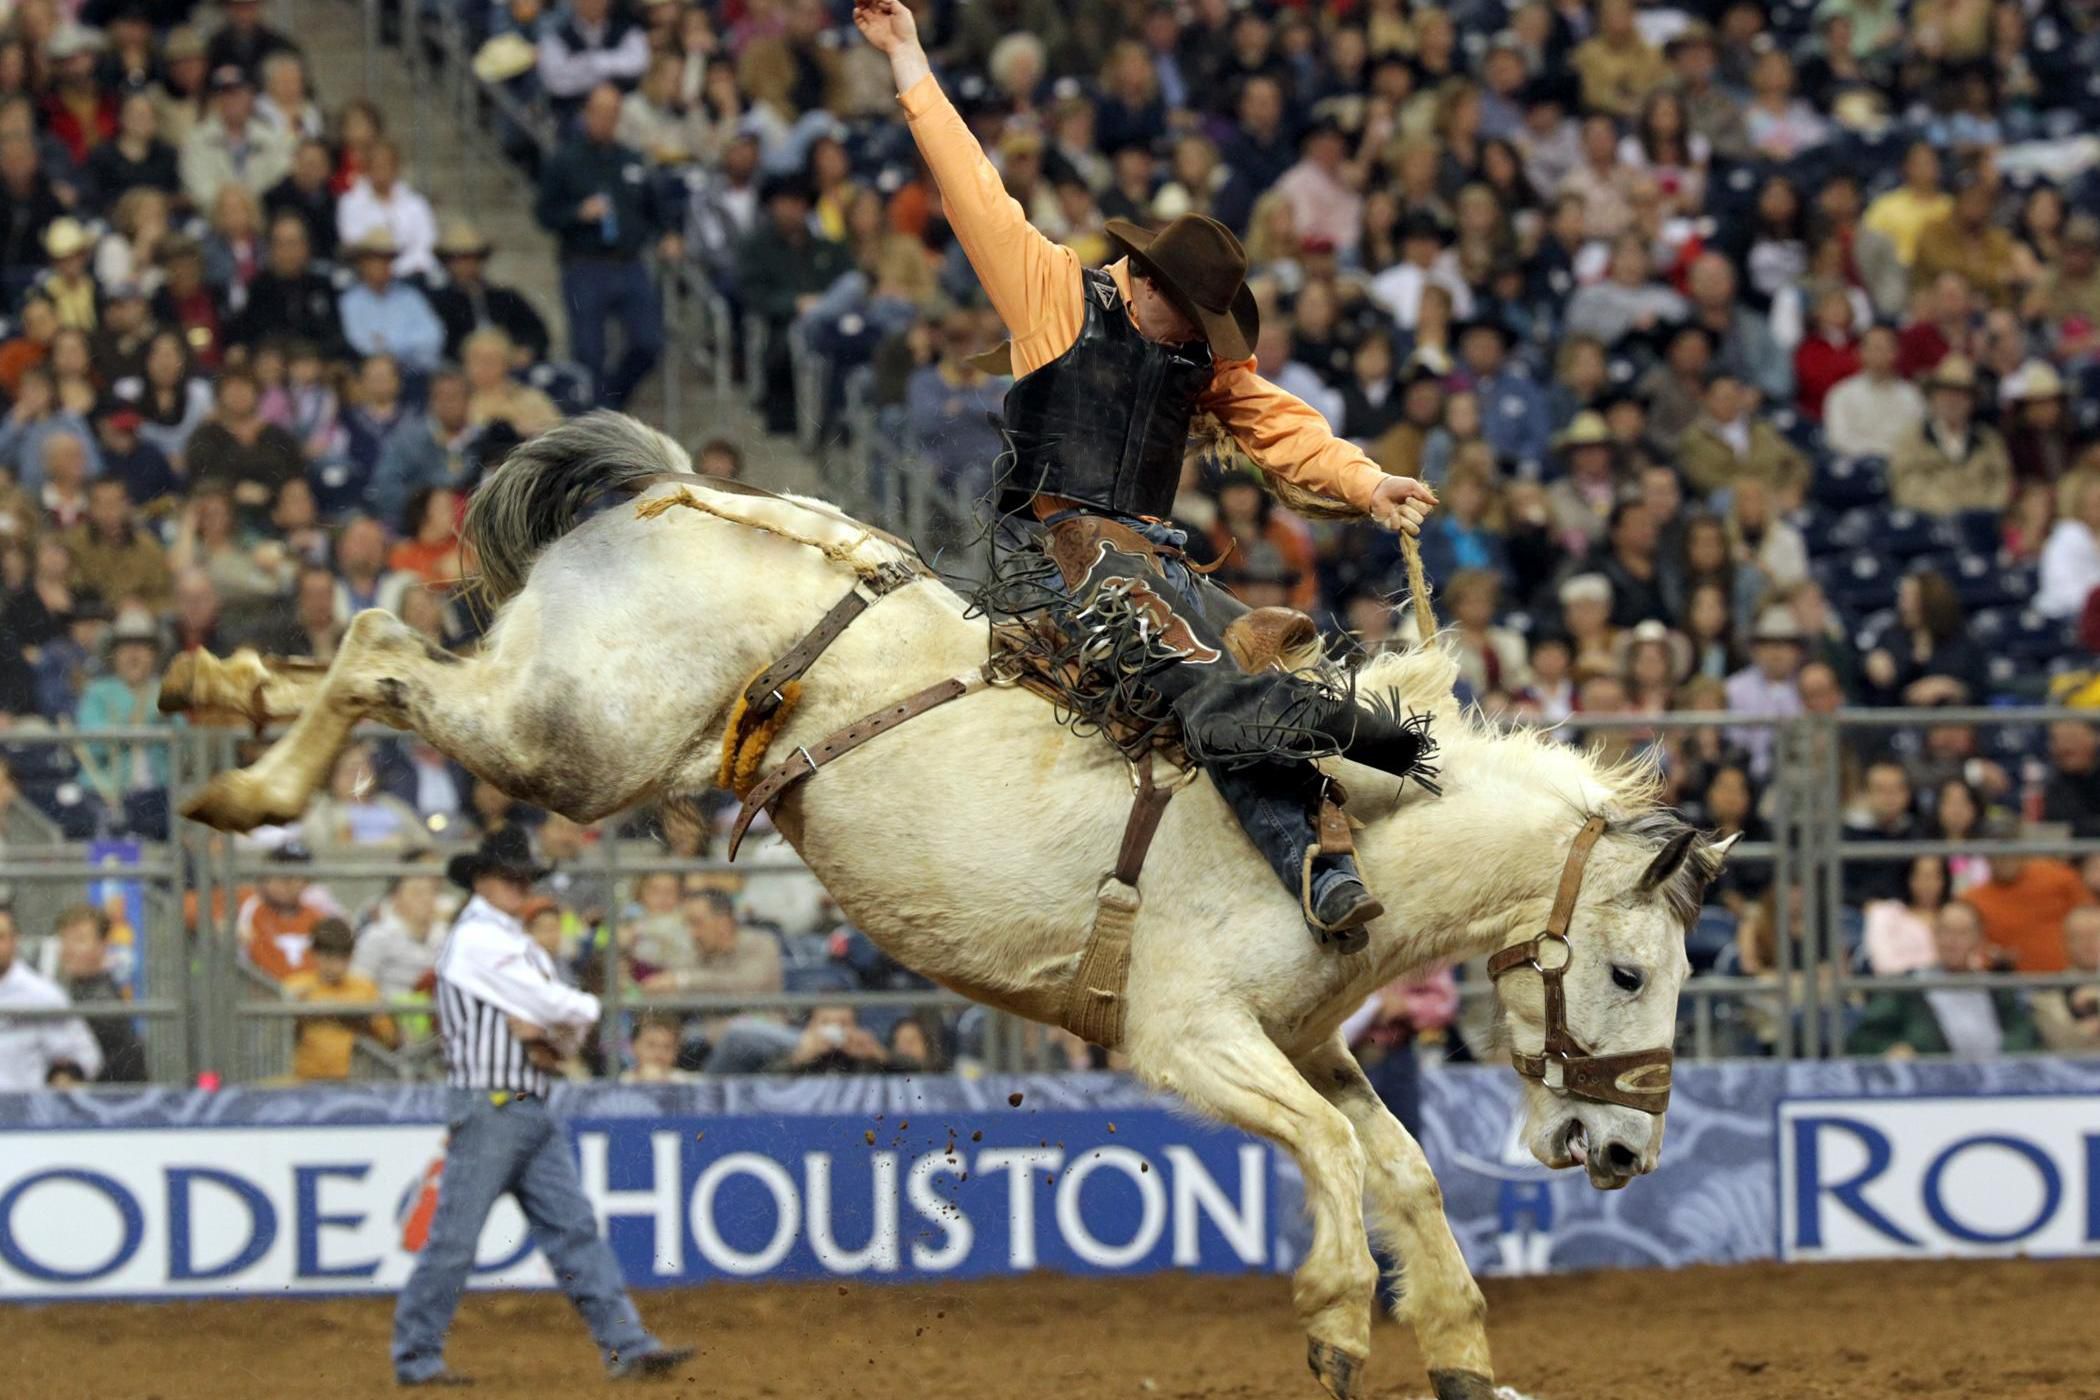 RodeoHouston is our city&#39;s signature annual event!